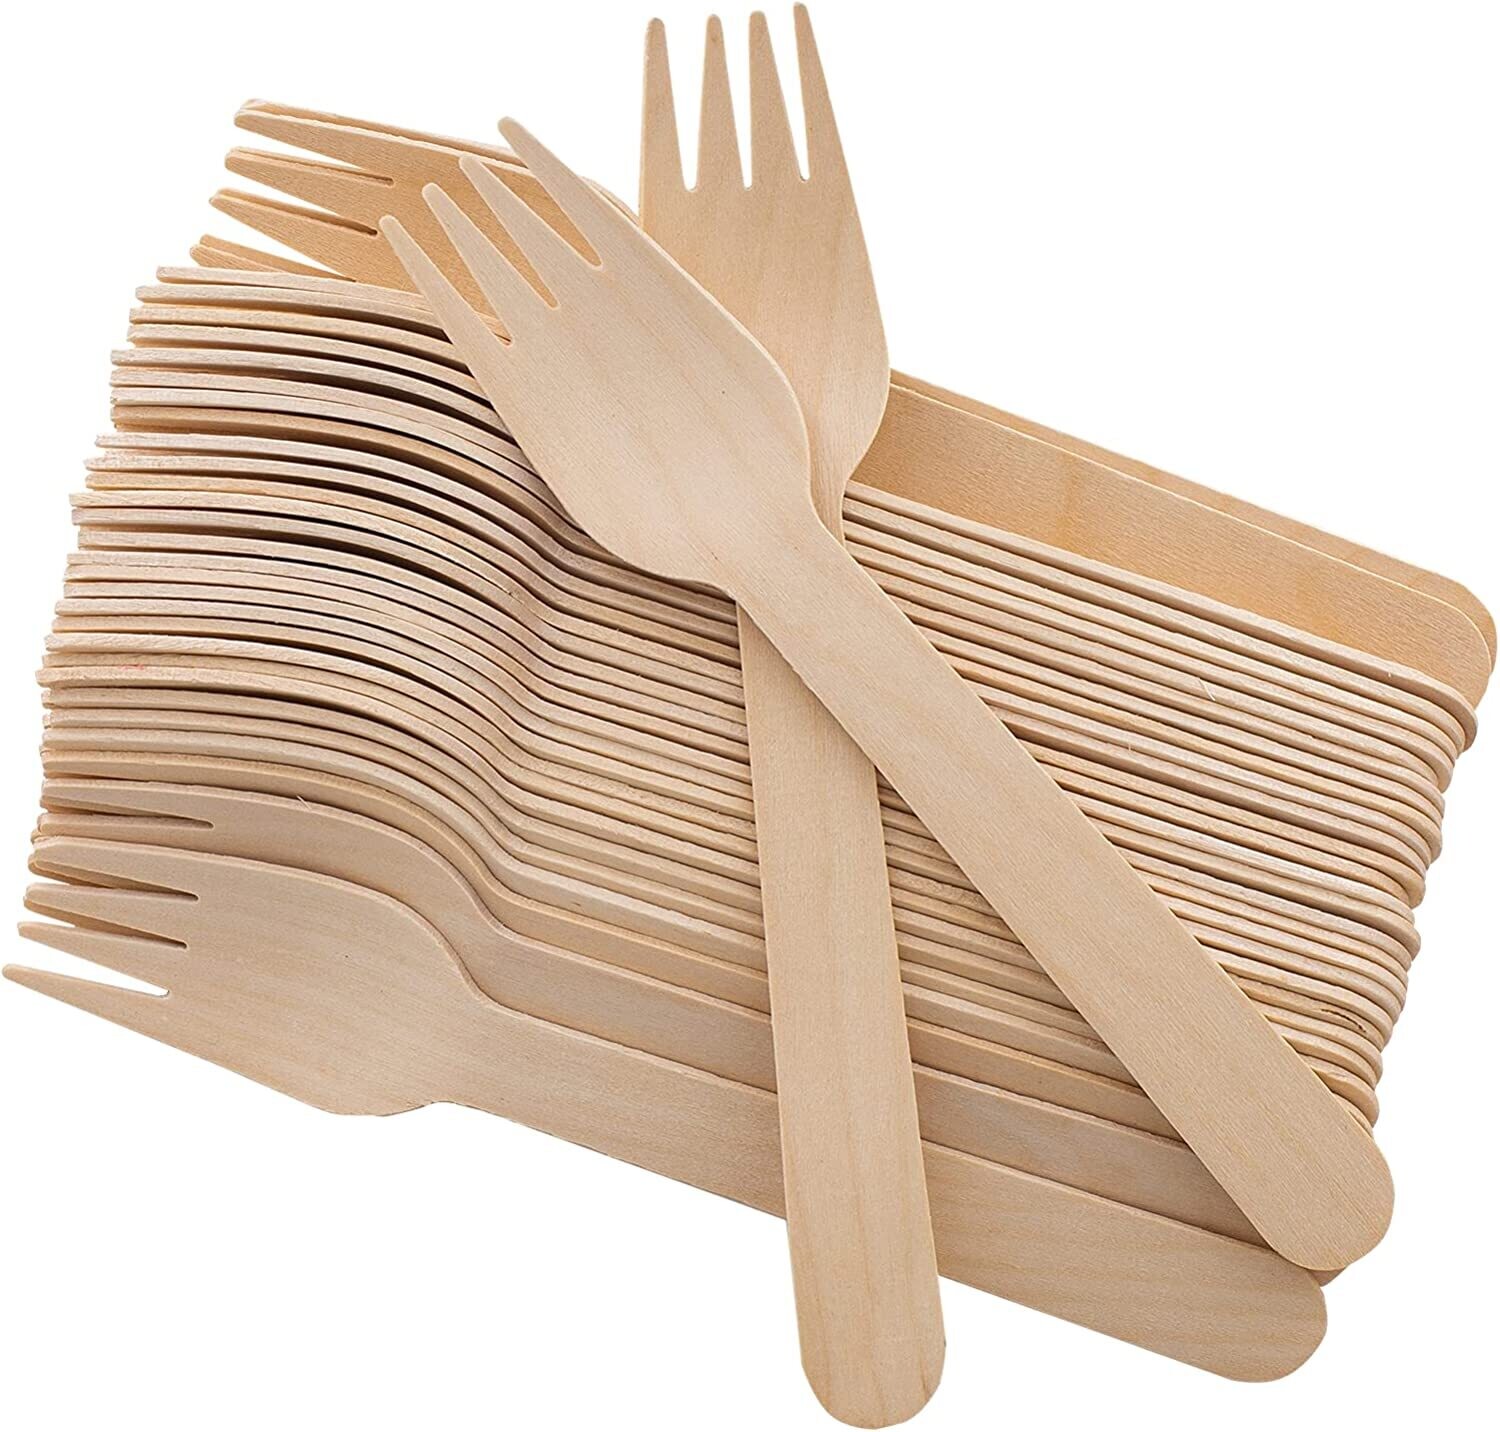 Disposable Wooden Fork 25pcs ,Great for Parties, Camping,Weddings&Dinner Events (Spoons)